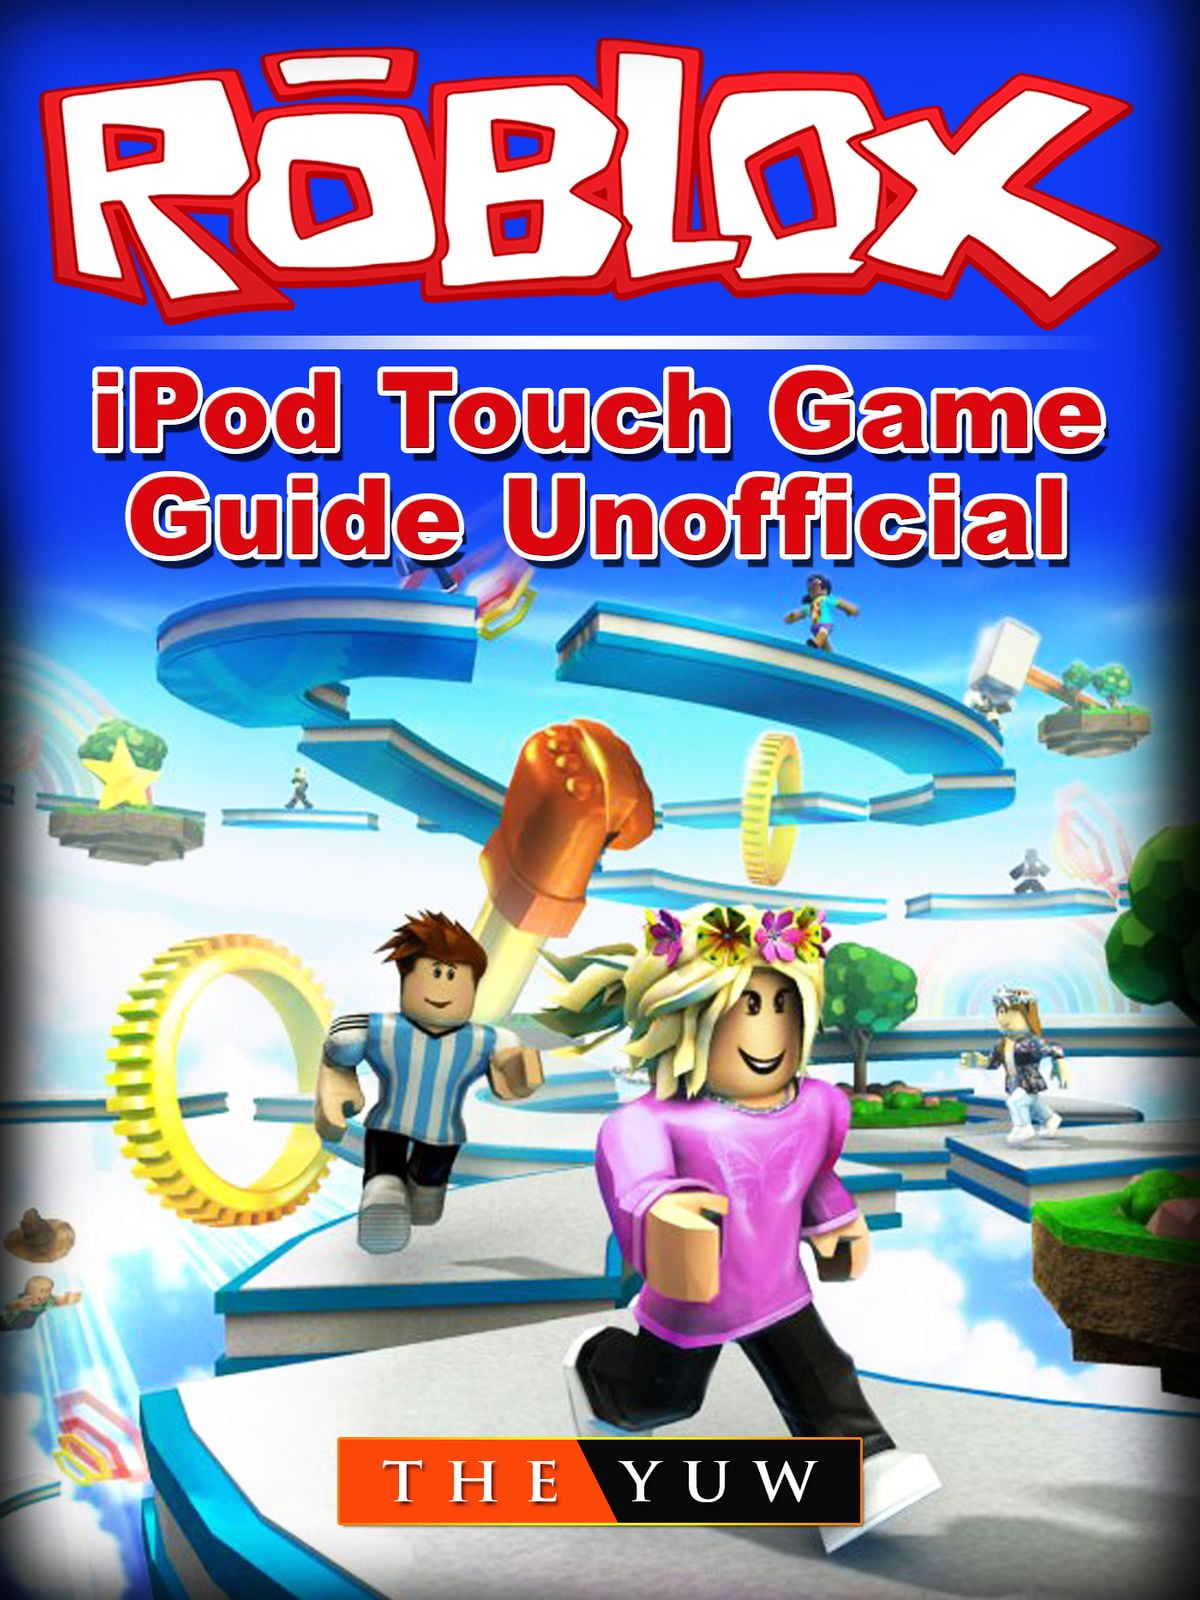 Roblox Ipod Touch Game Guide Unofficial Ebook Walmart Com Walmart Com - roblox fitness game